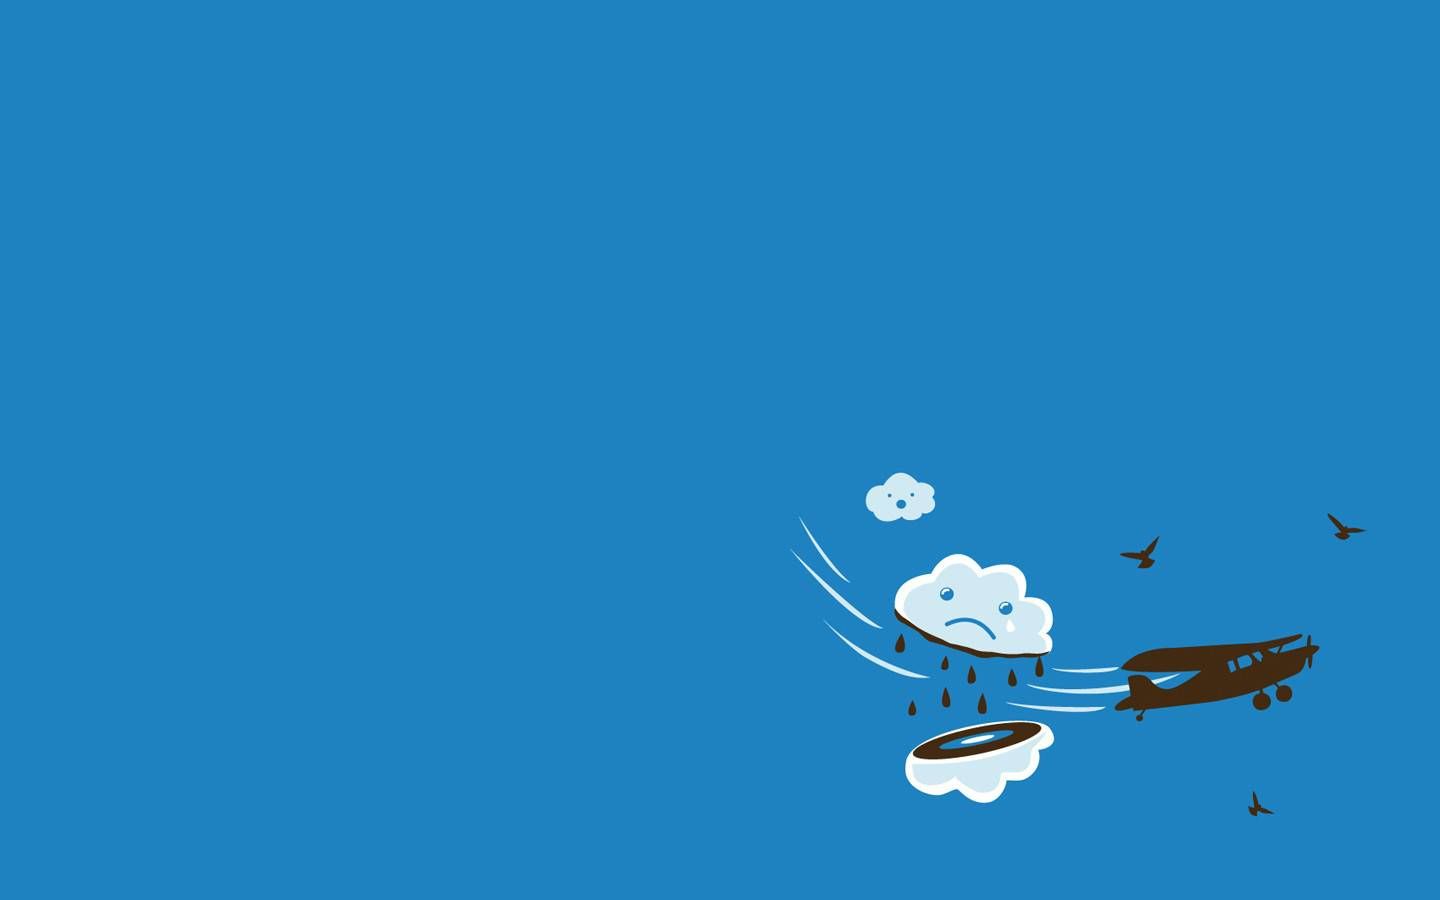 Threadless fun art wallpaper - - High Quality and other